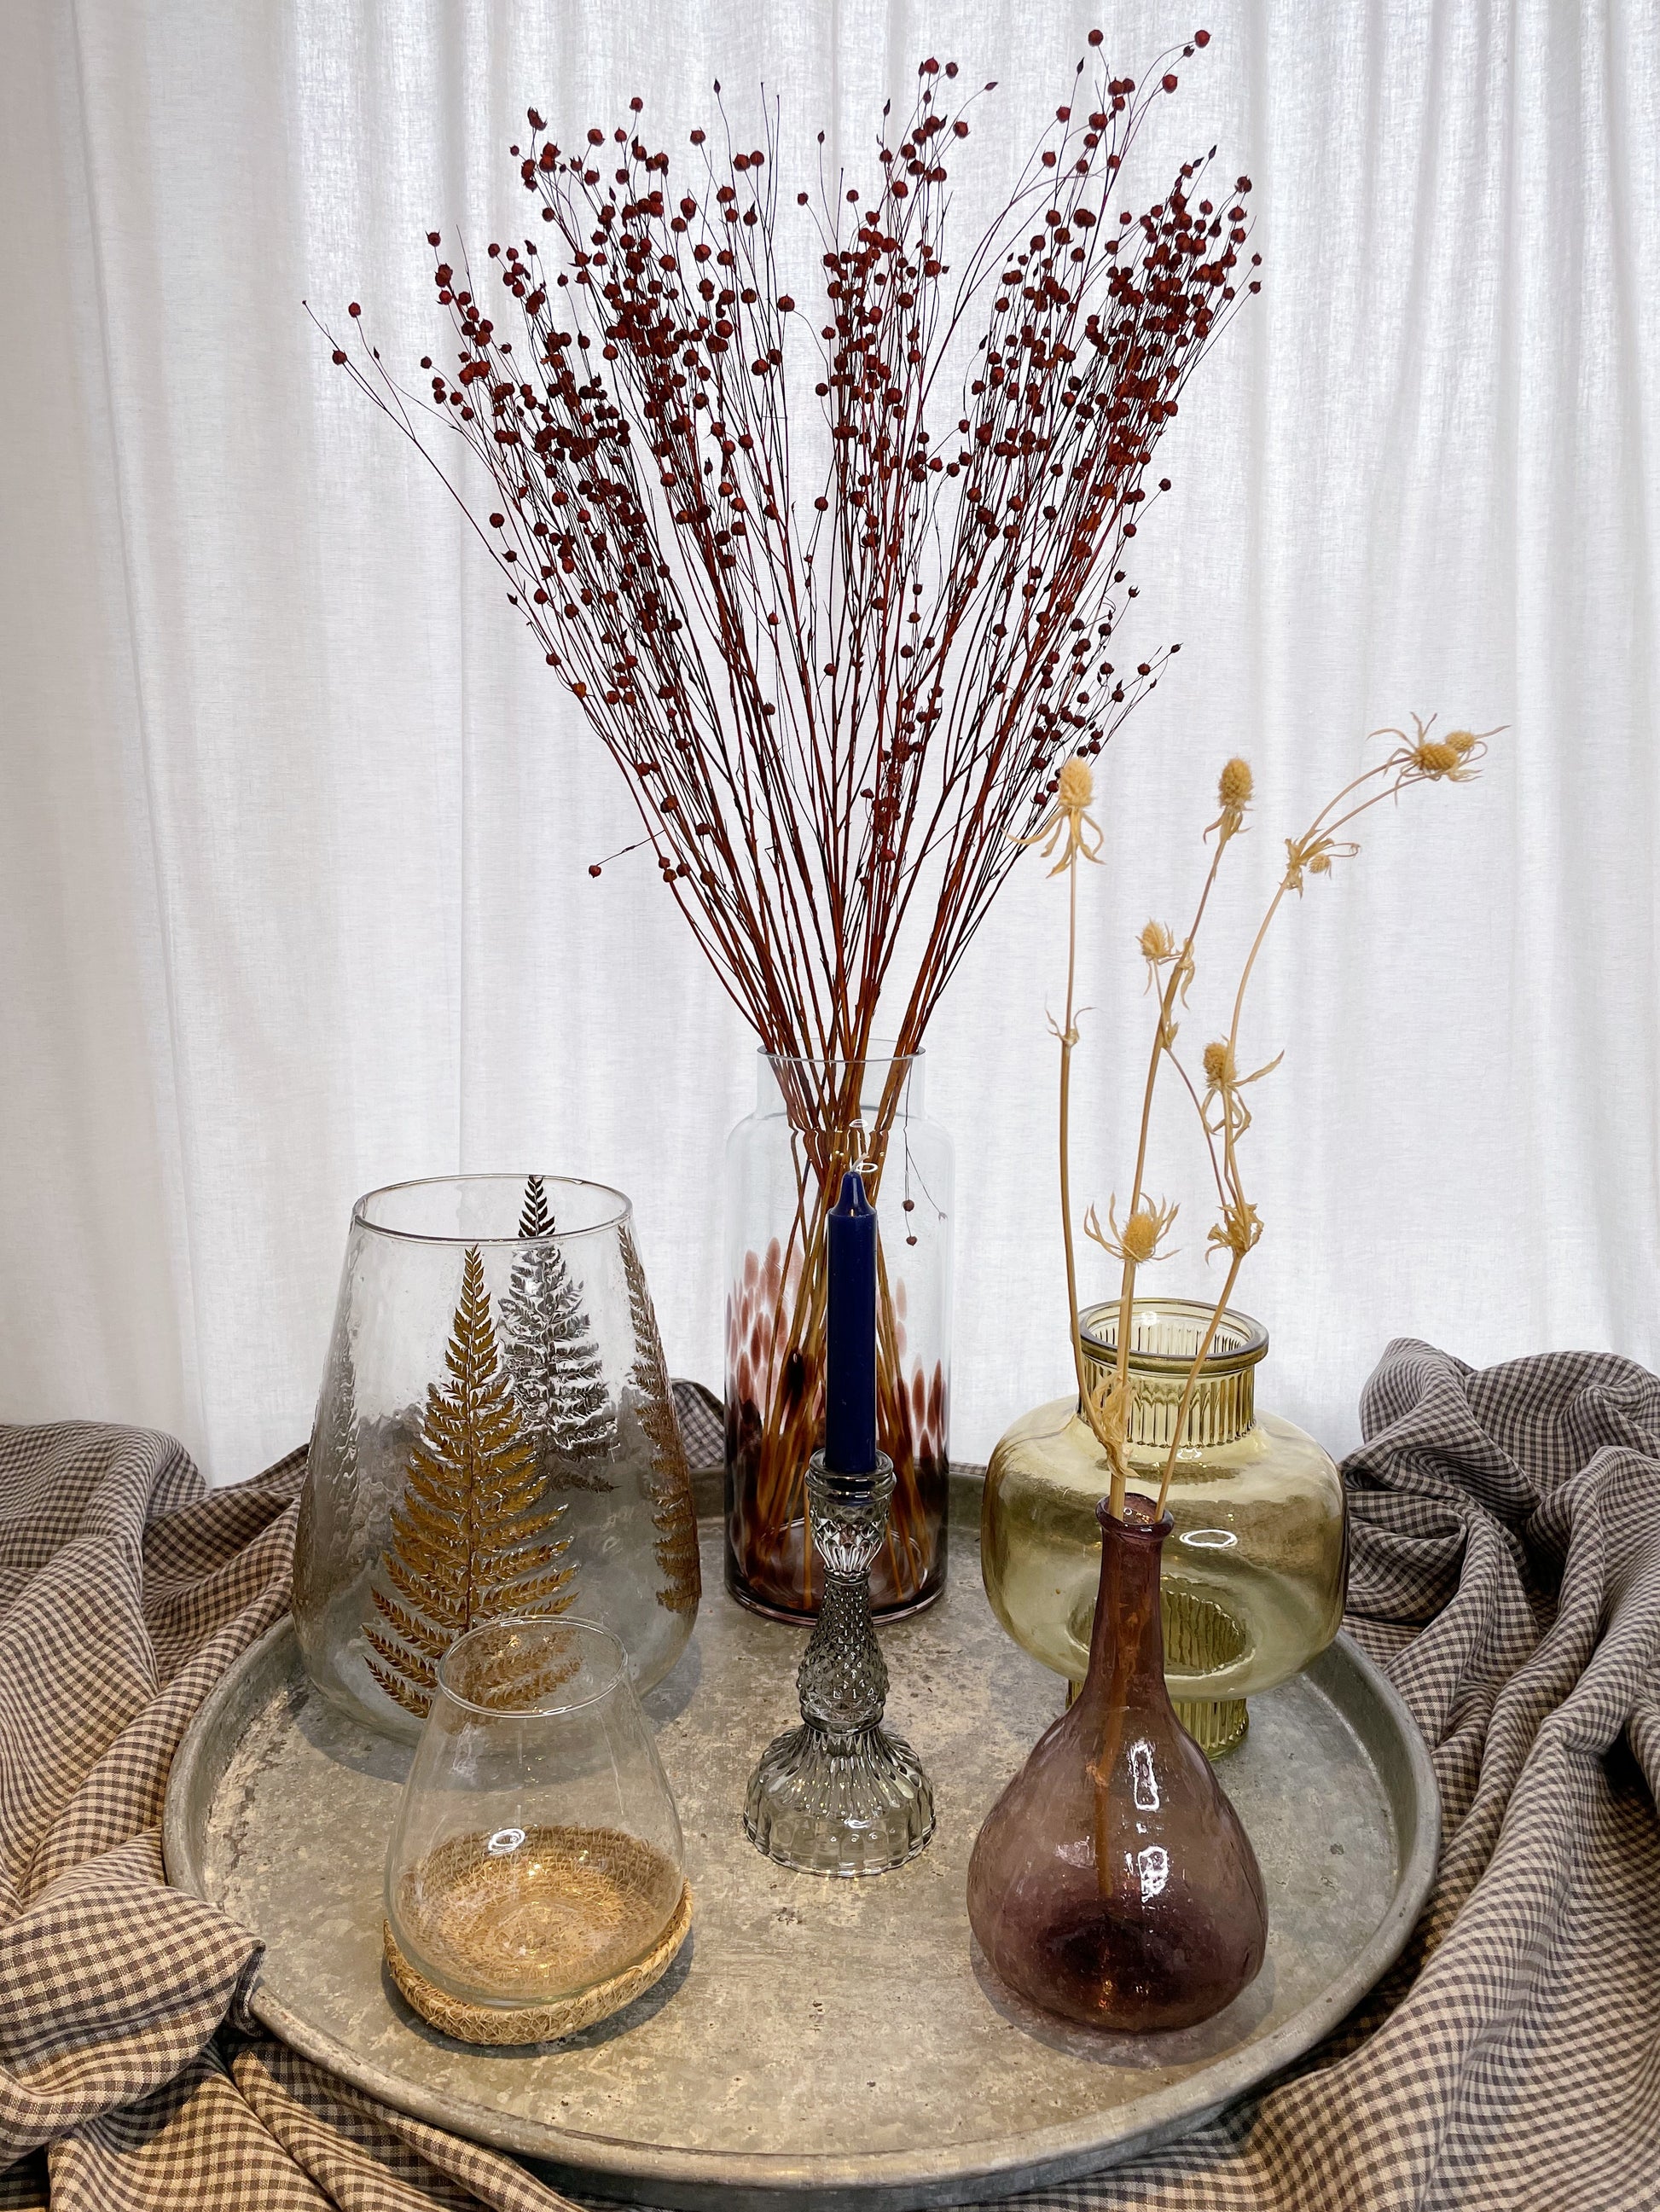 A selection of glass vases on a metal tray, on top of a check tablecloth 